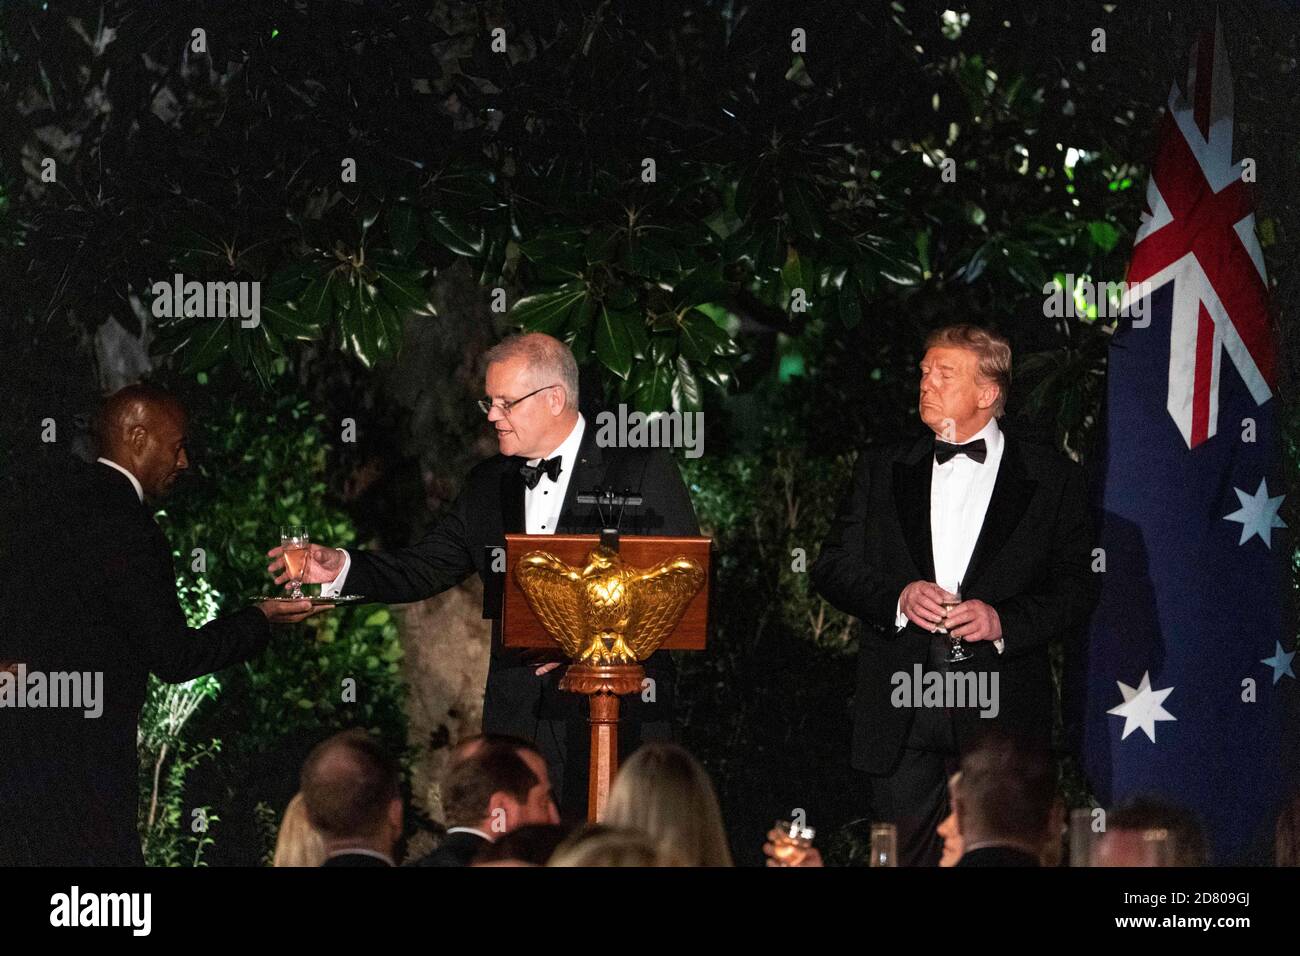 U.S. President Donald Trump and Australian Prime Minister Scott Morrison toast during a state visit at the White House on September 9th, 2019 in Washington, D.C. Credit: Alex Edelman/The Photo Access Stock Photo